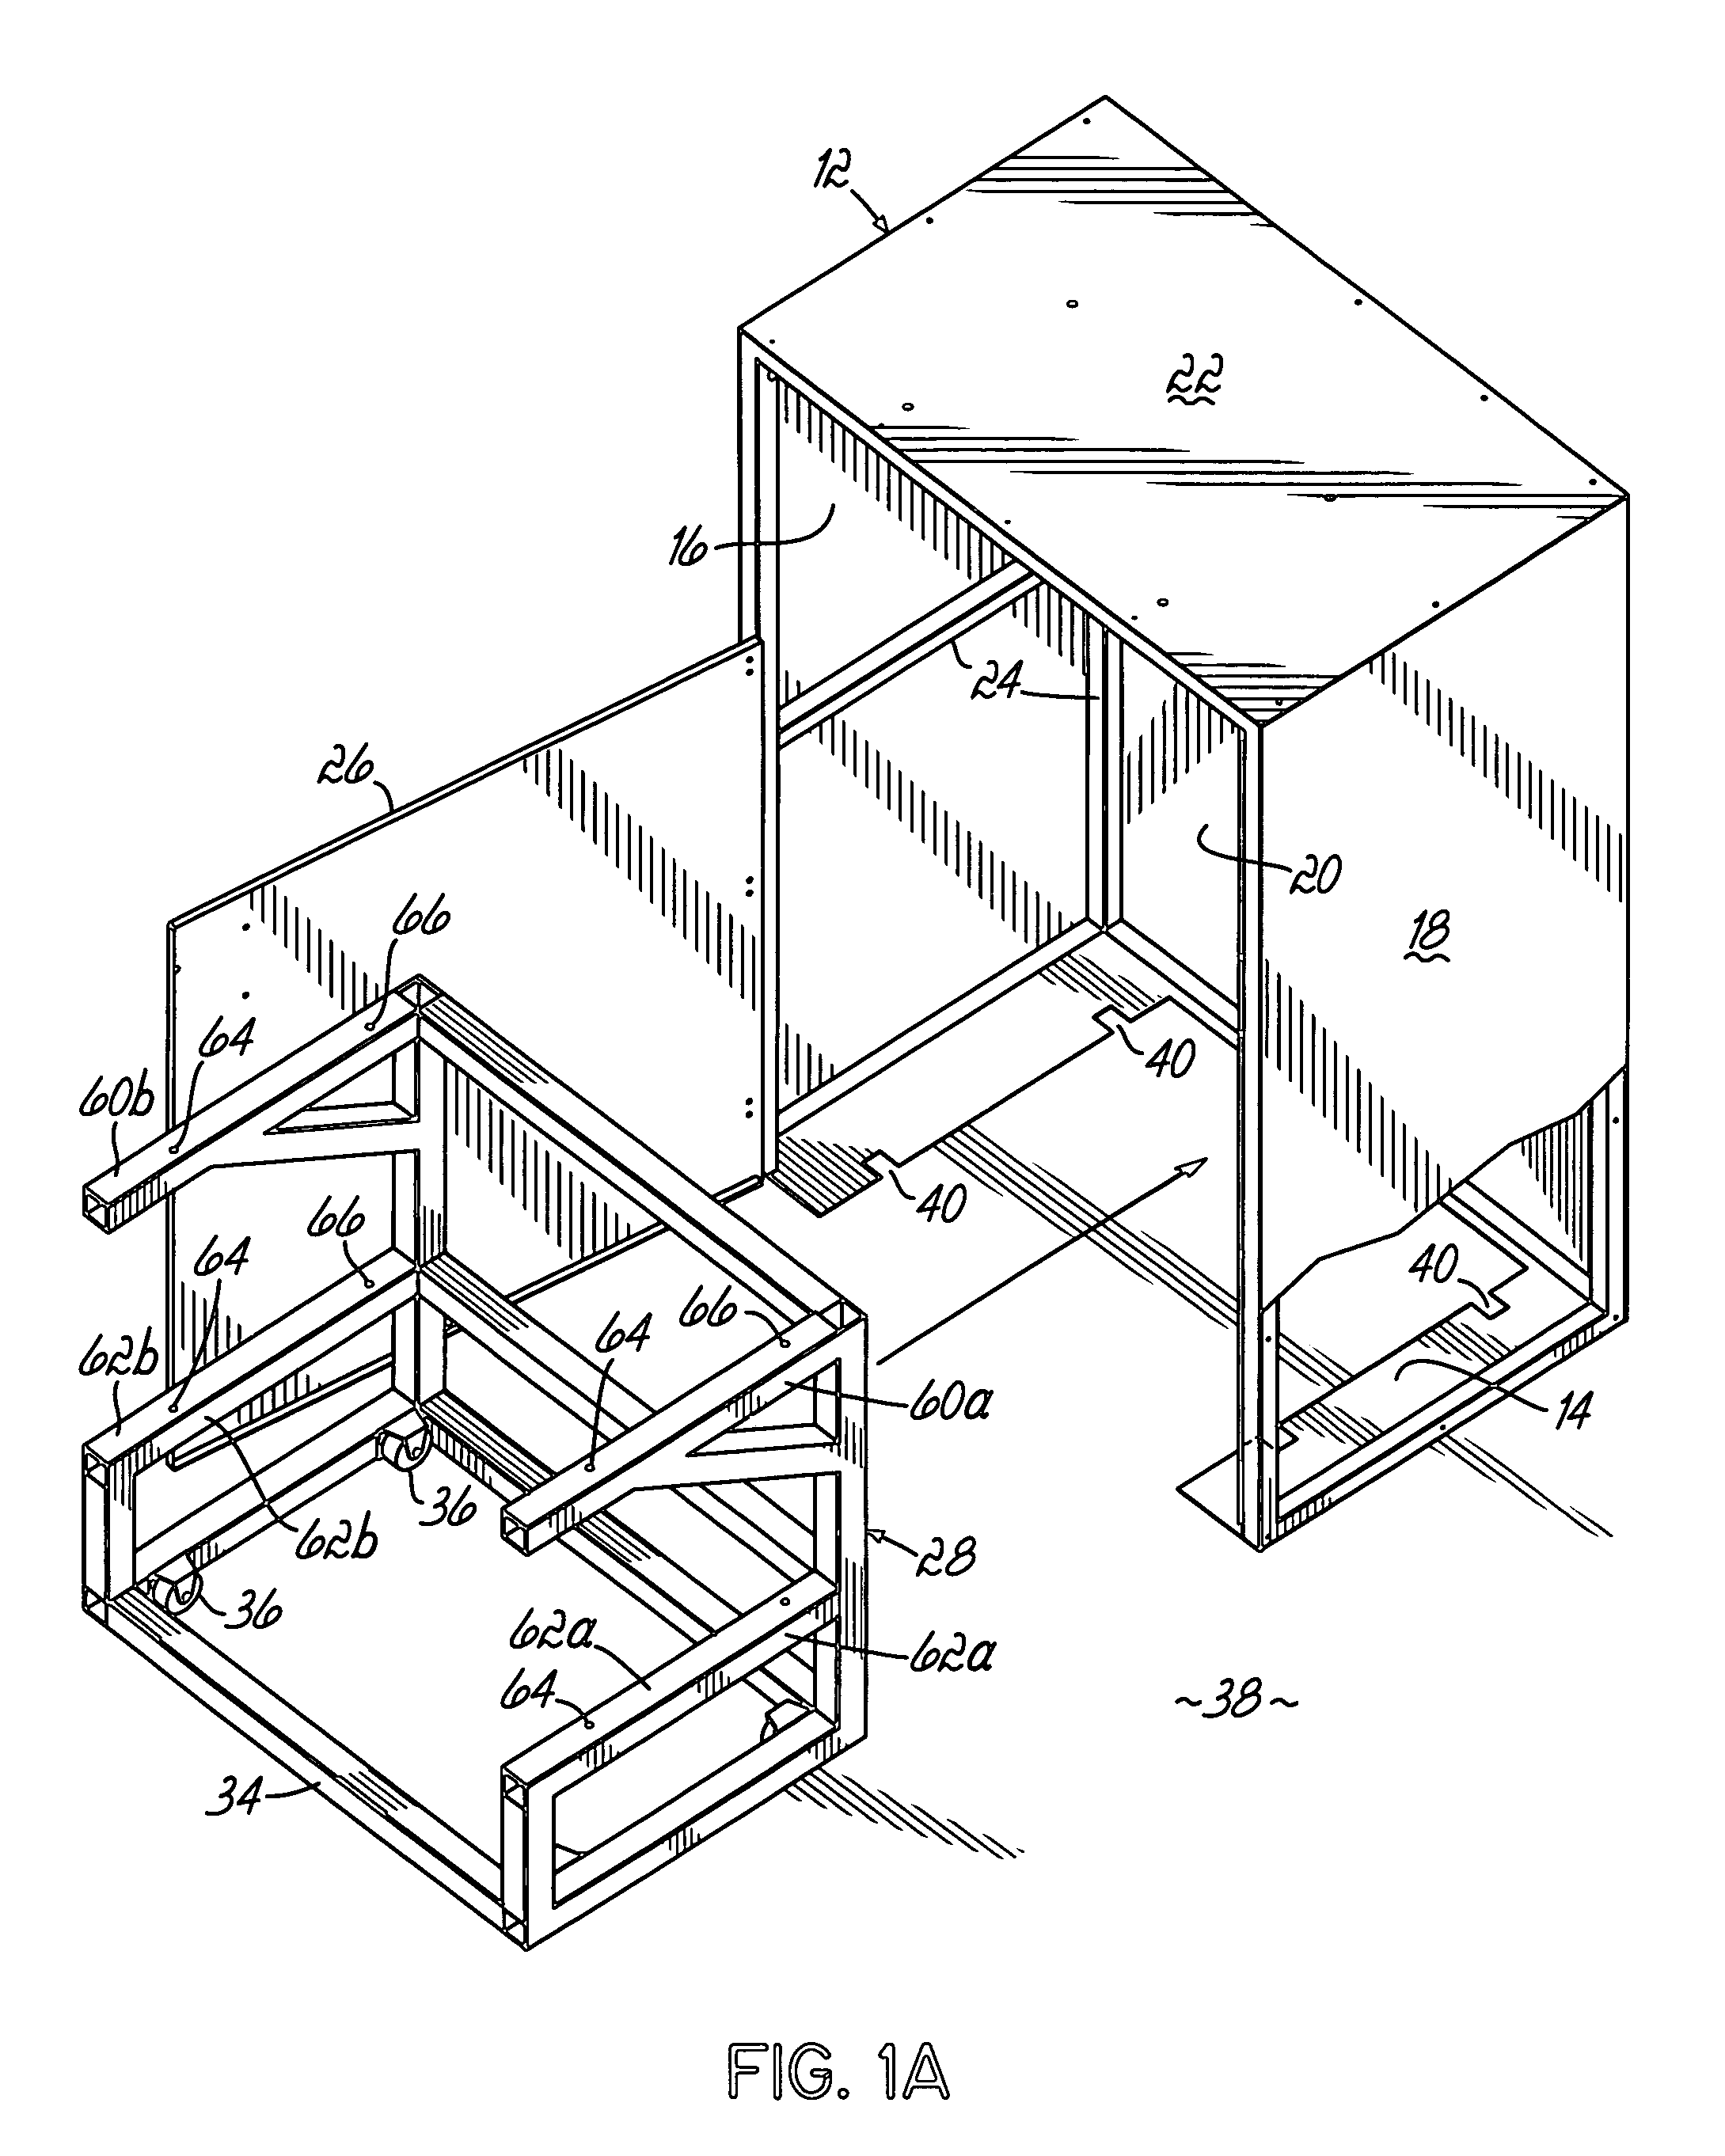 Dry gas production systems for pressurizing a space and methods of operating such systems to produce a dry gas stream